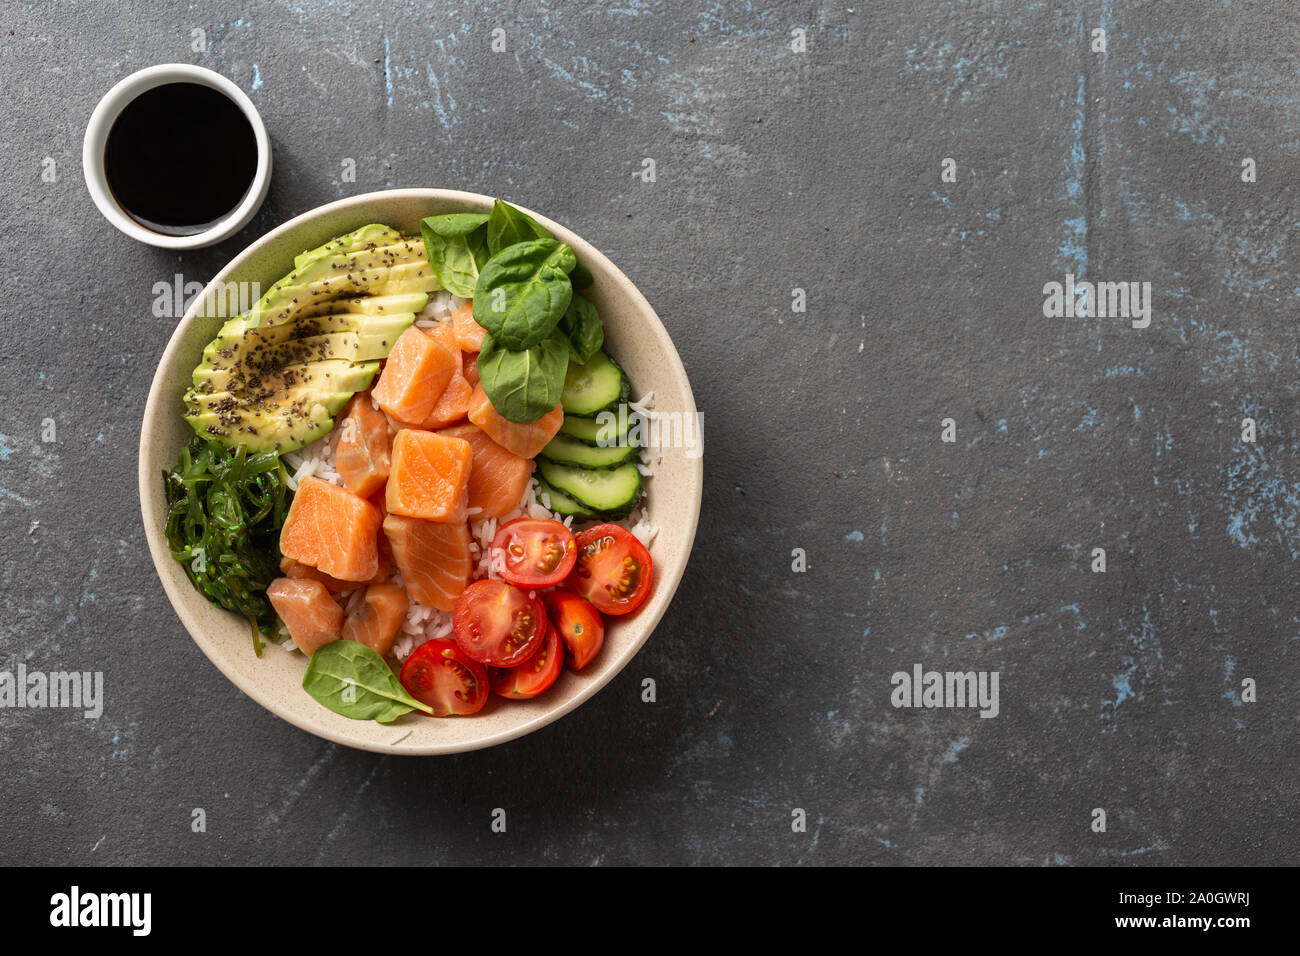 Tasty and healthy food concept Organic poke bowl with salmon, avocado, vegetables and chia seeds Stock Photo